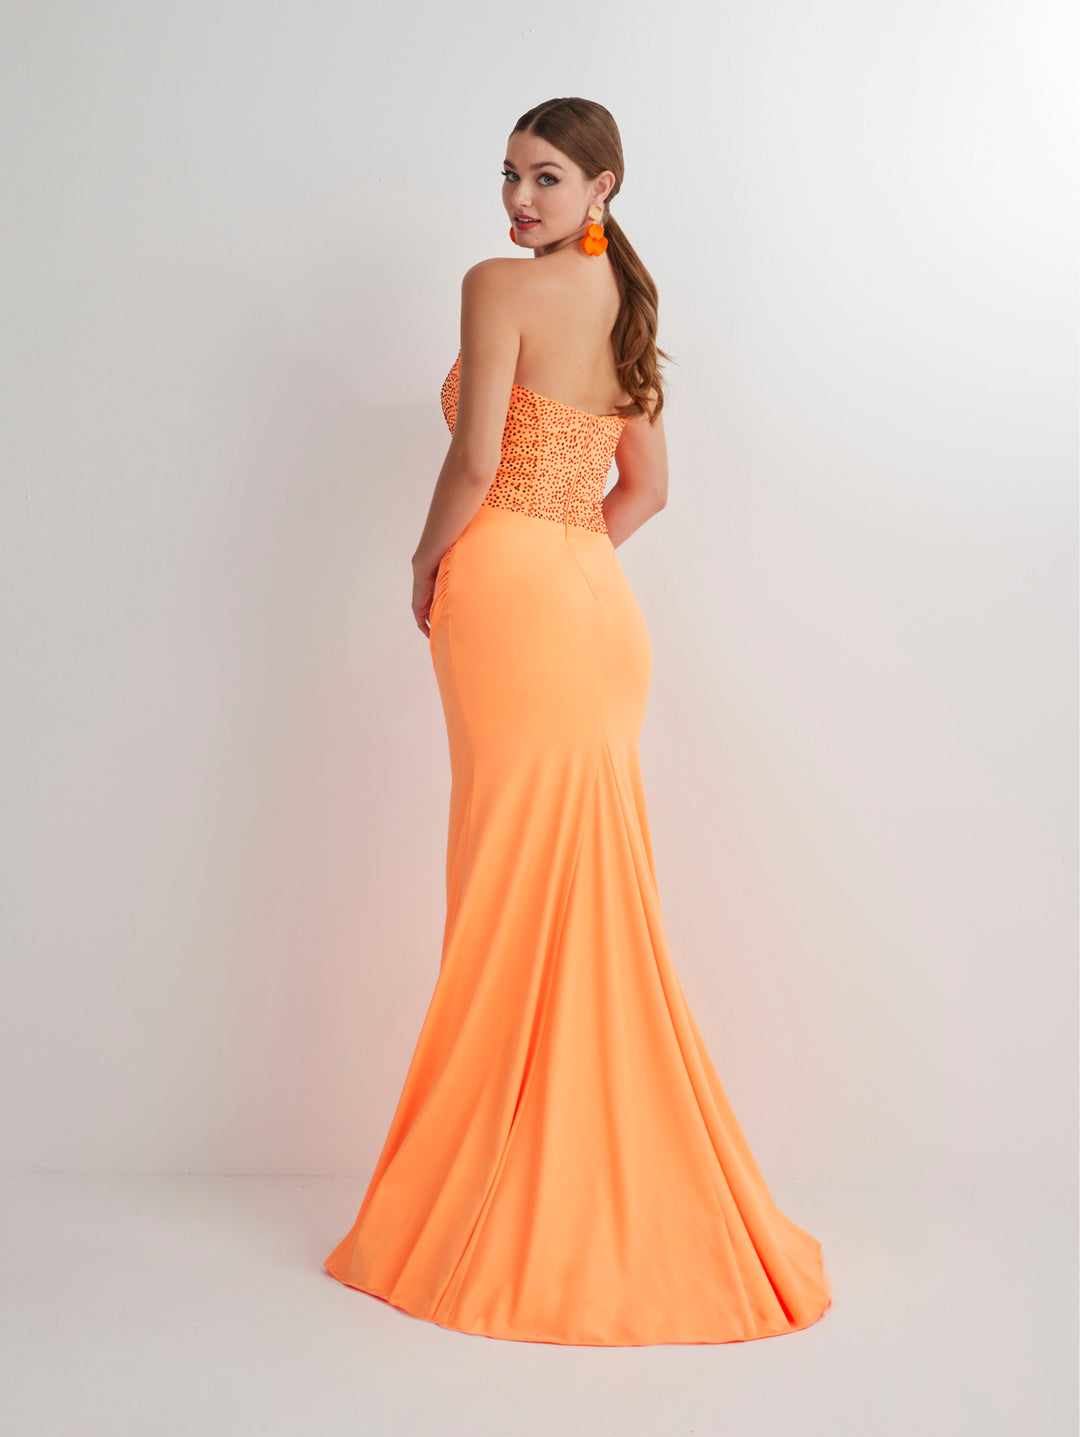 Beaded Spandex Strapless Slit Gown by Studio 17 12899